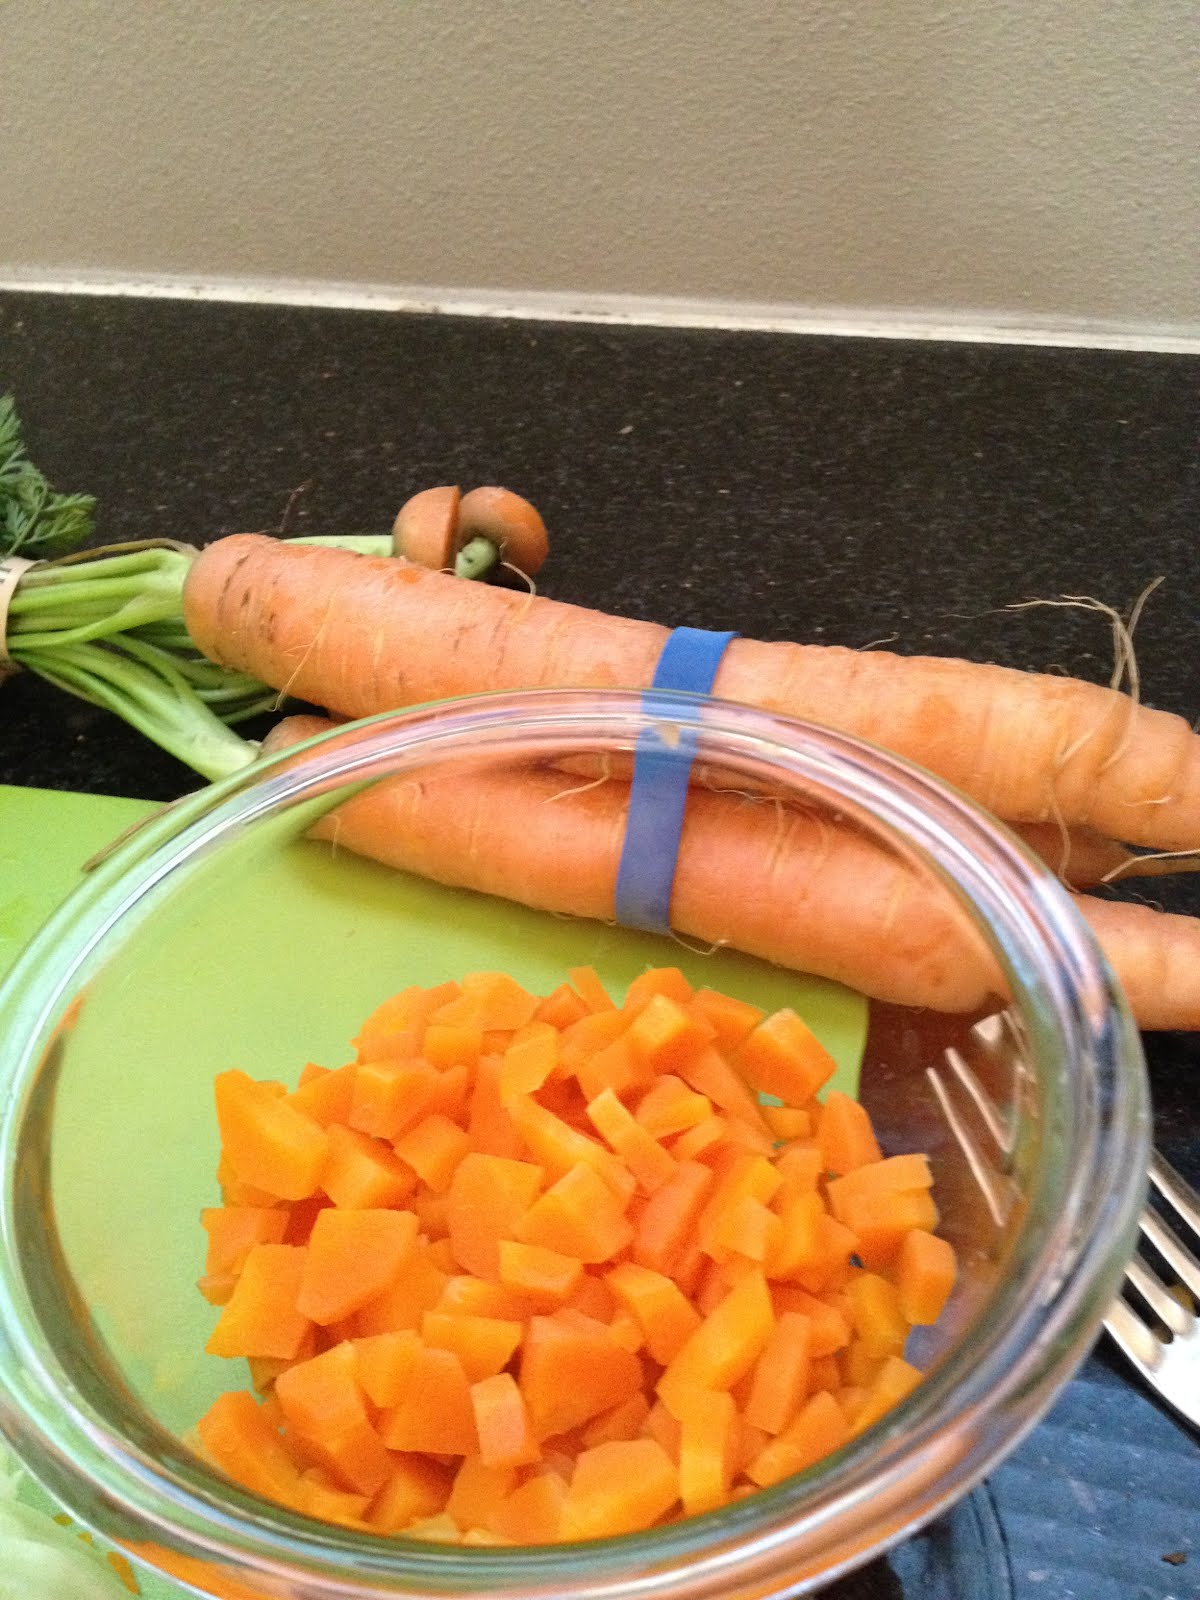 my musings on my mom, wife, life journey...: Carrots as a first finger food